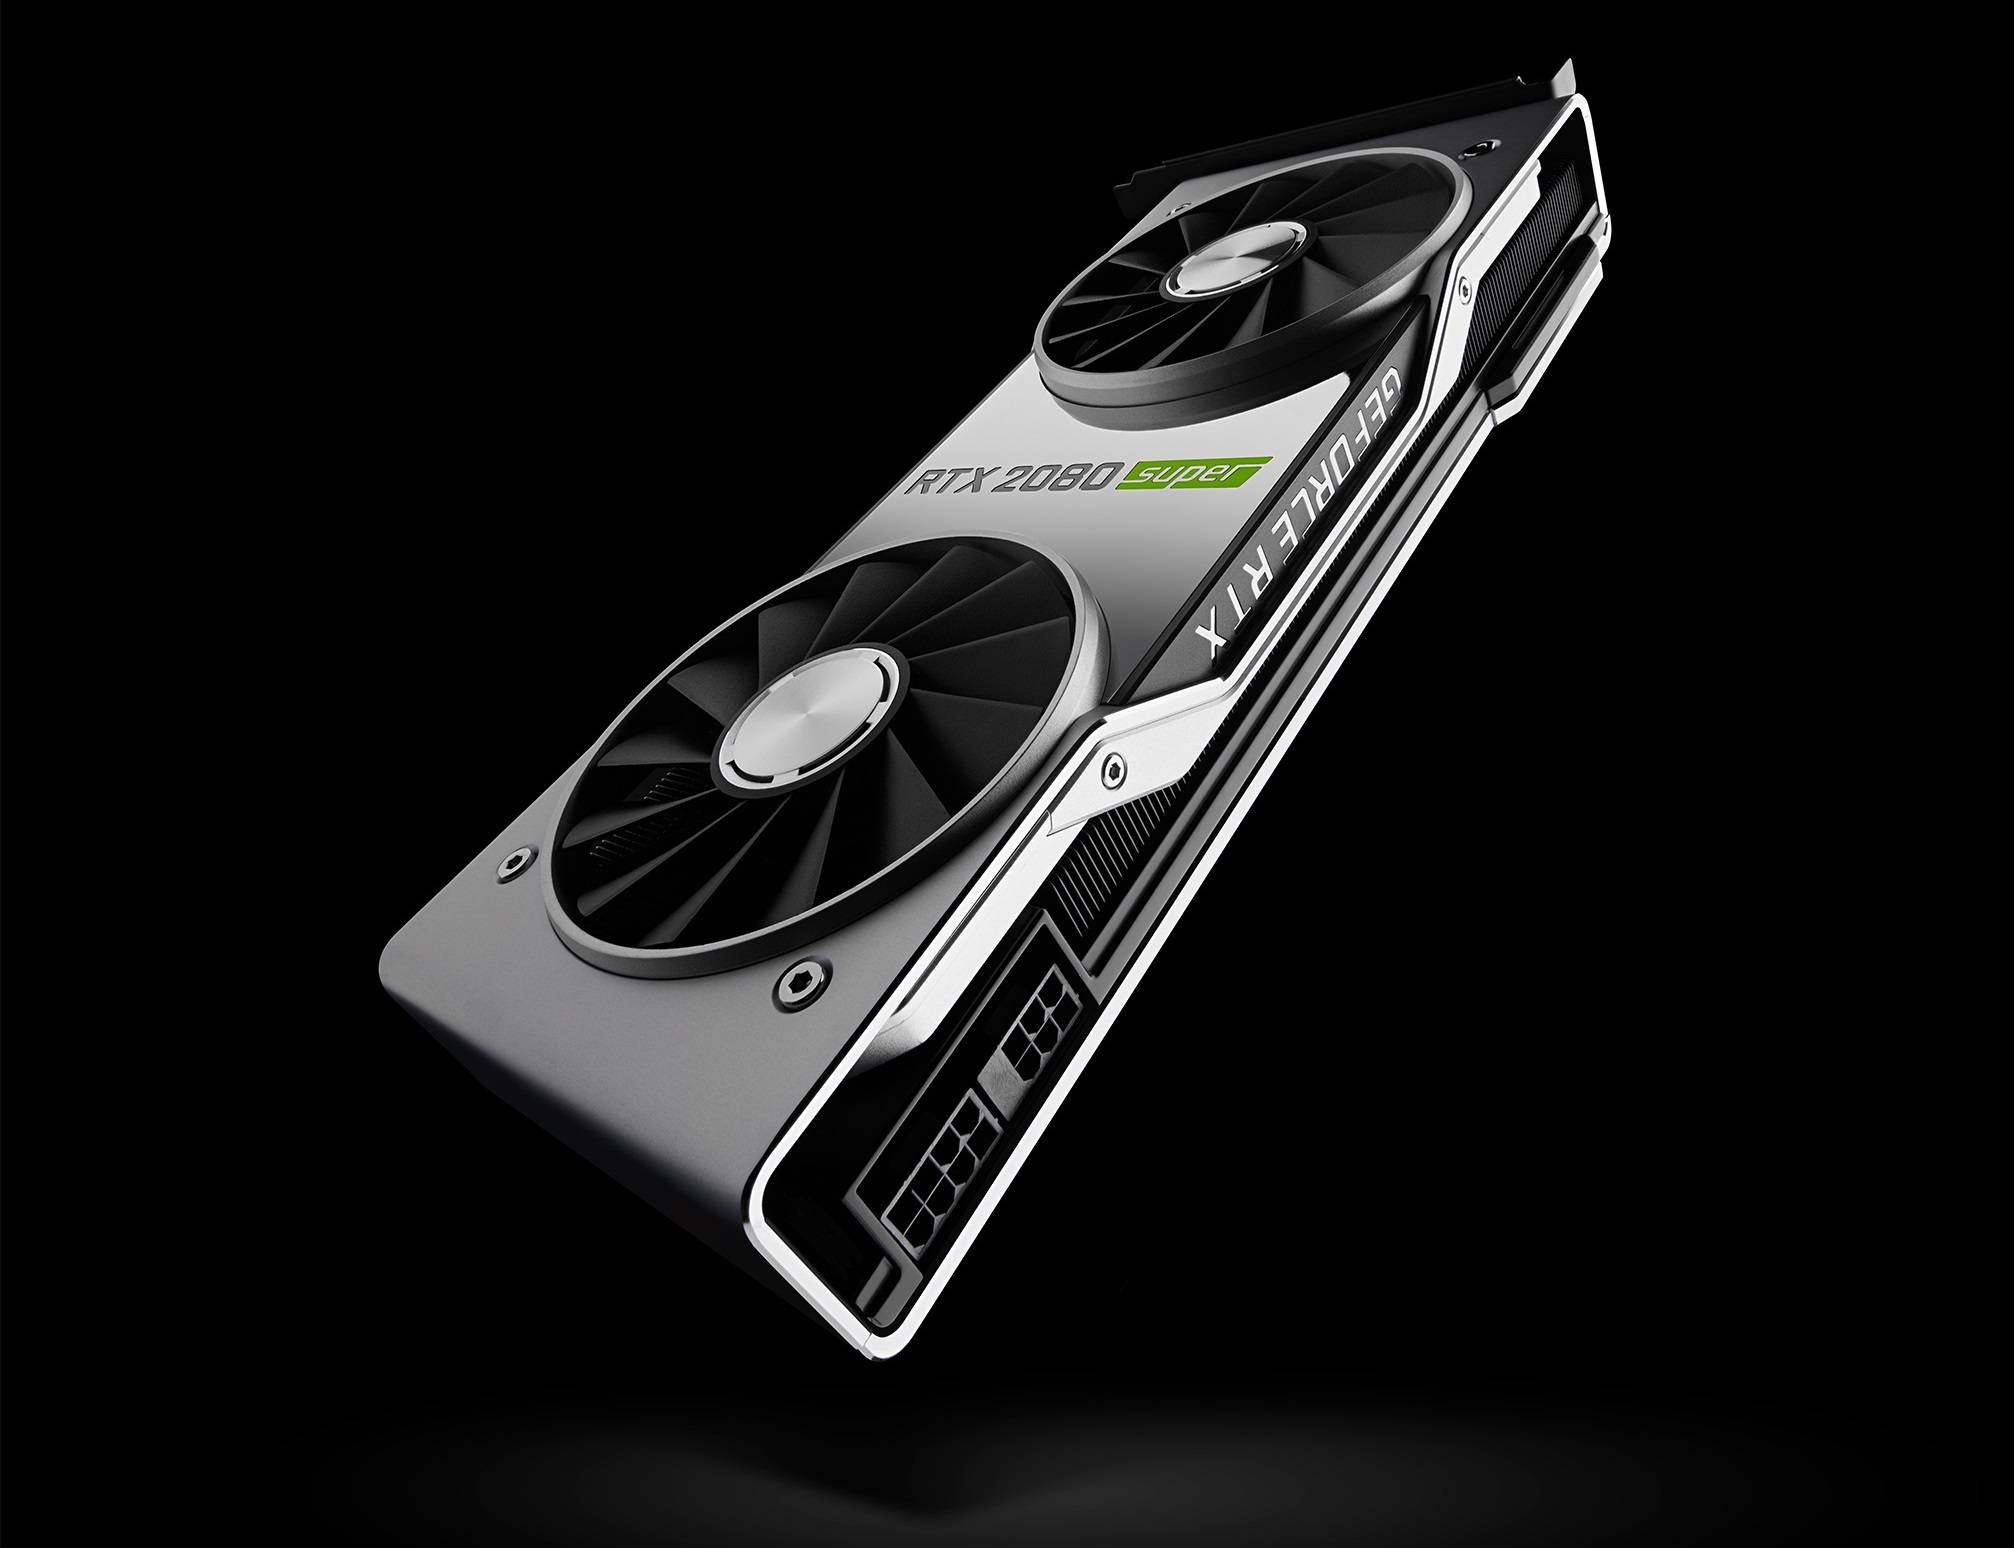 NVIDIA GeForce RTX SUPER Series Graphics Cards